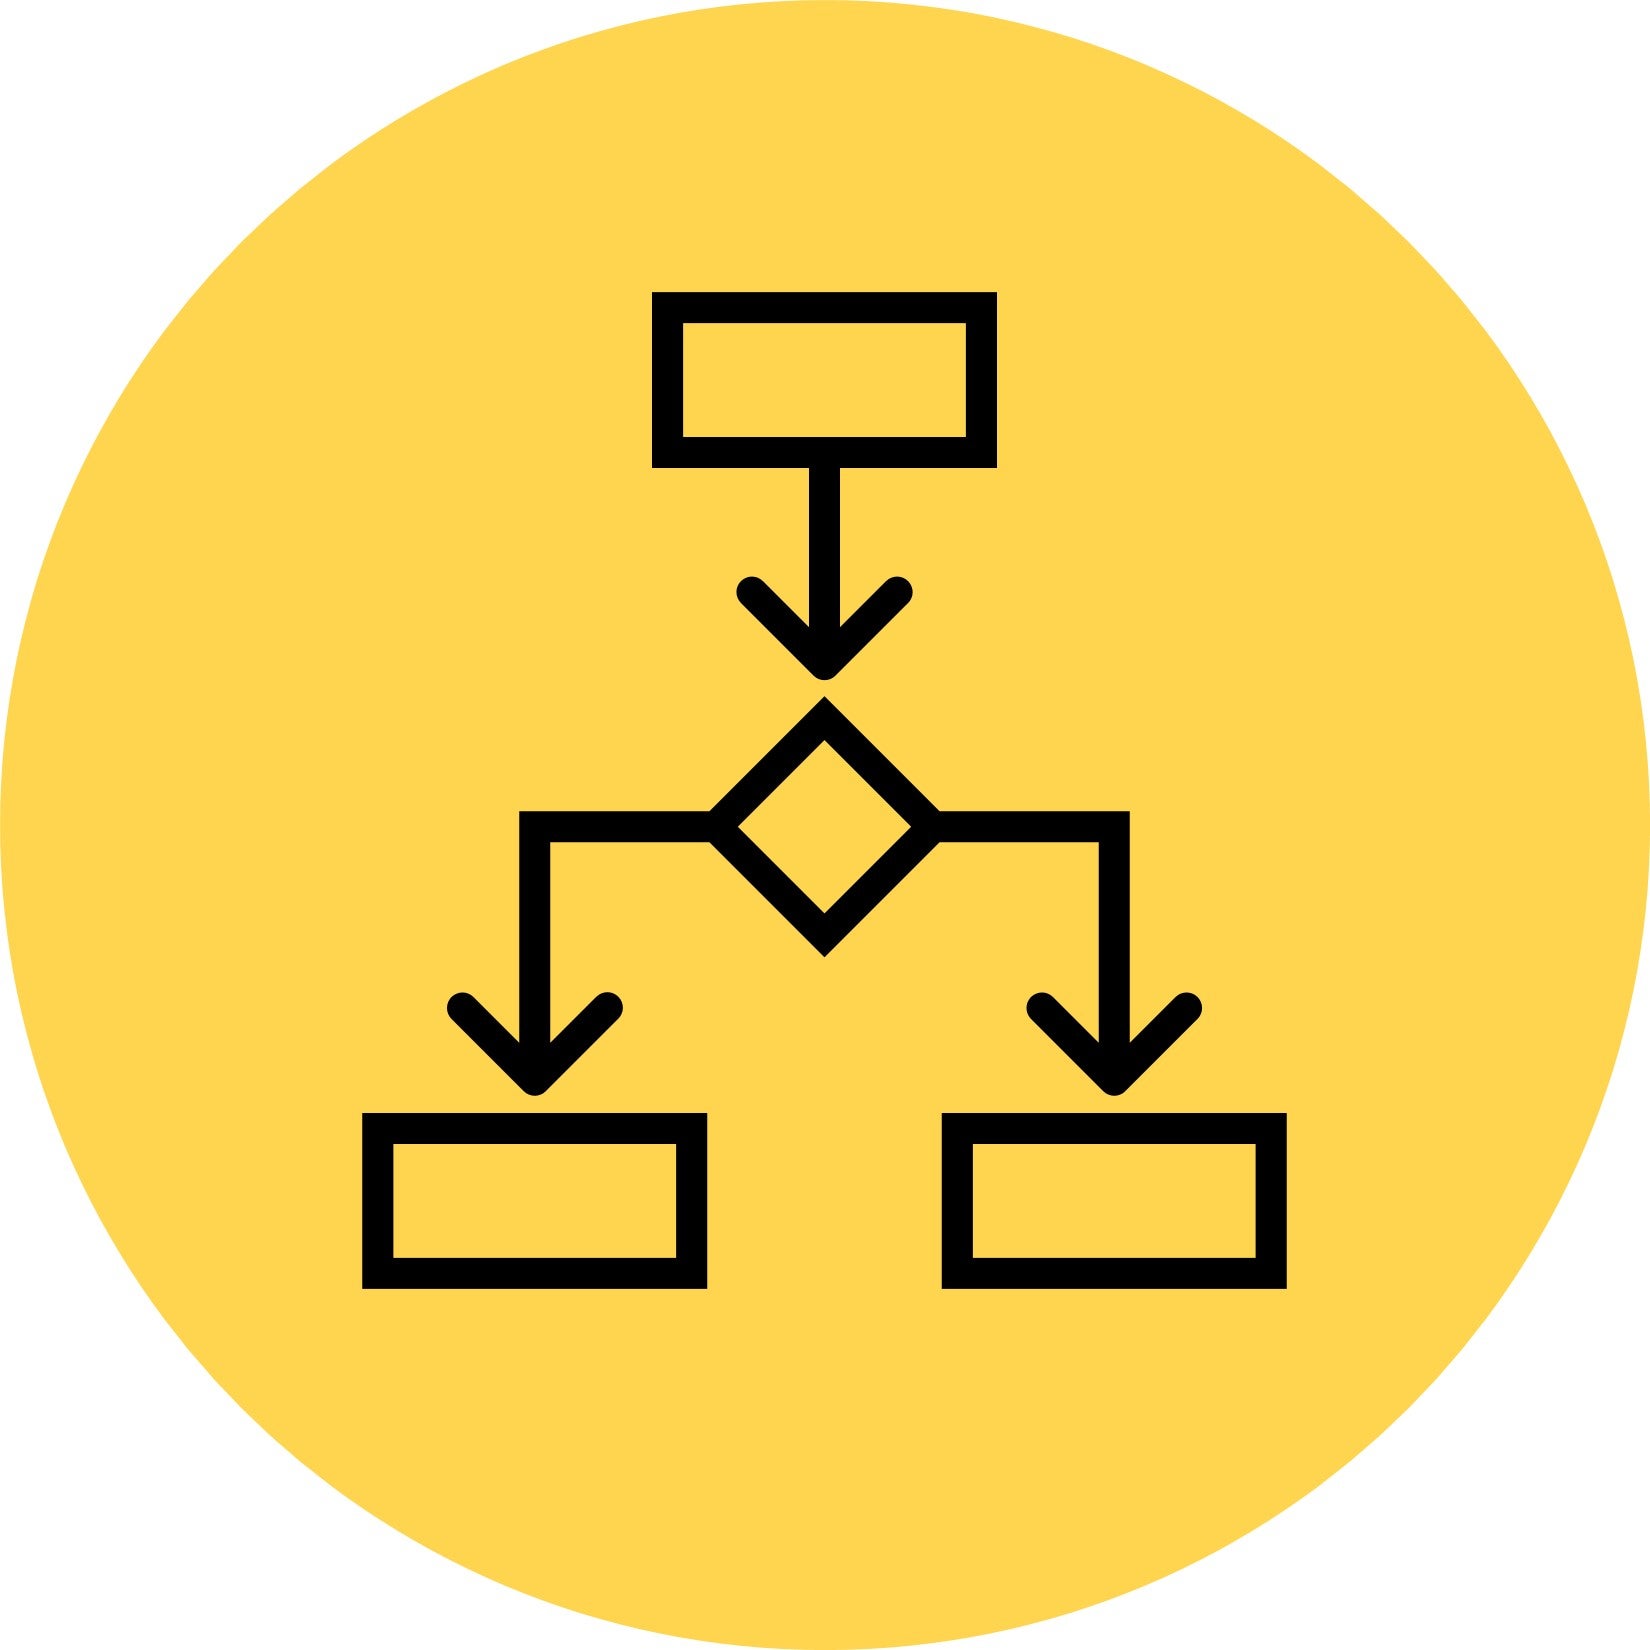 Flow chart of different steps in a process line icon